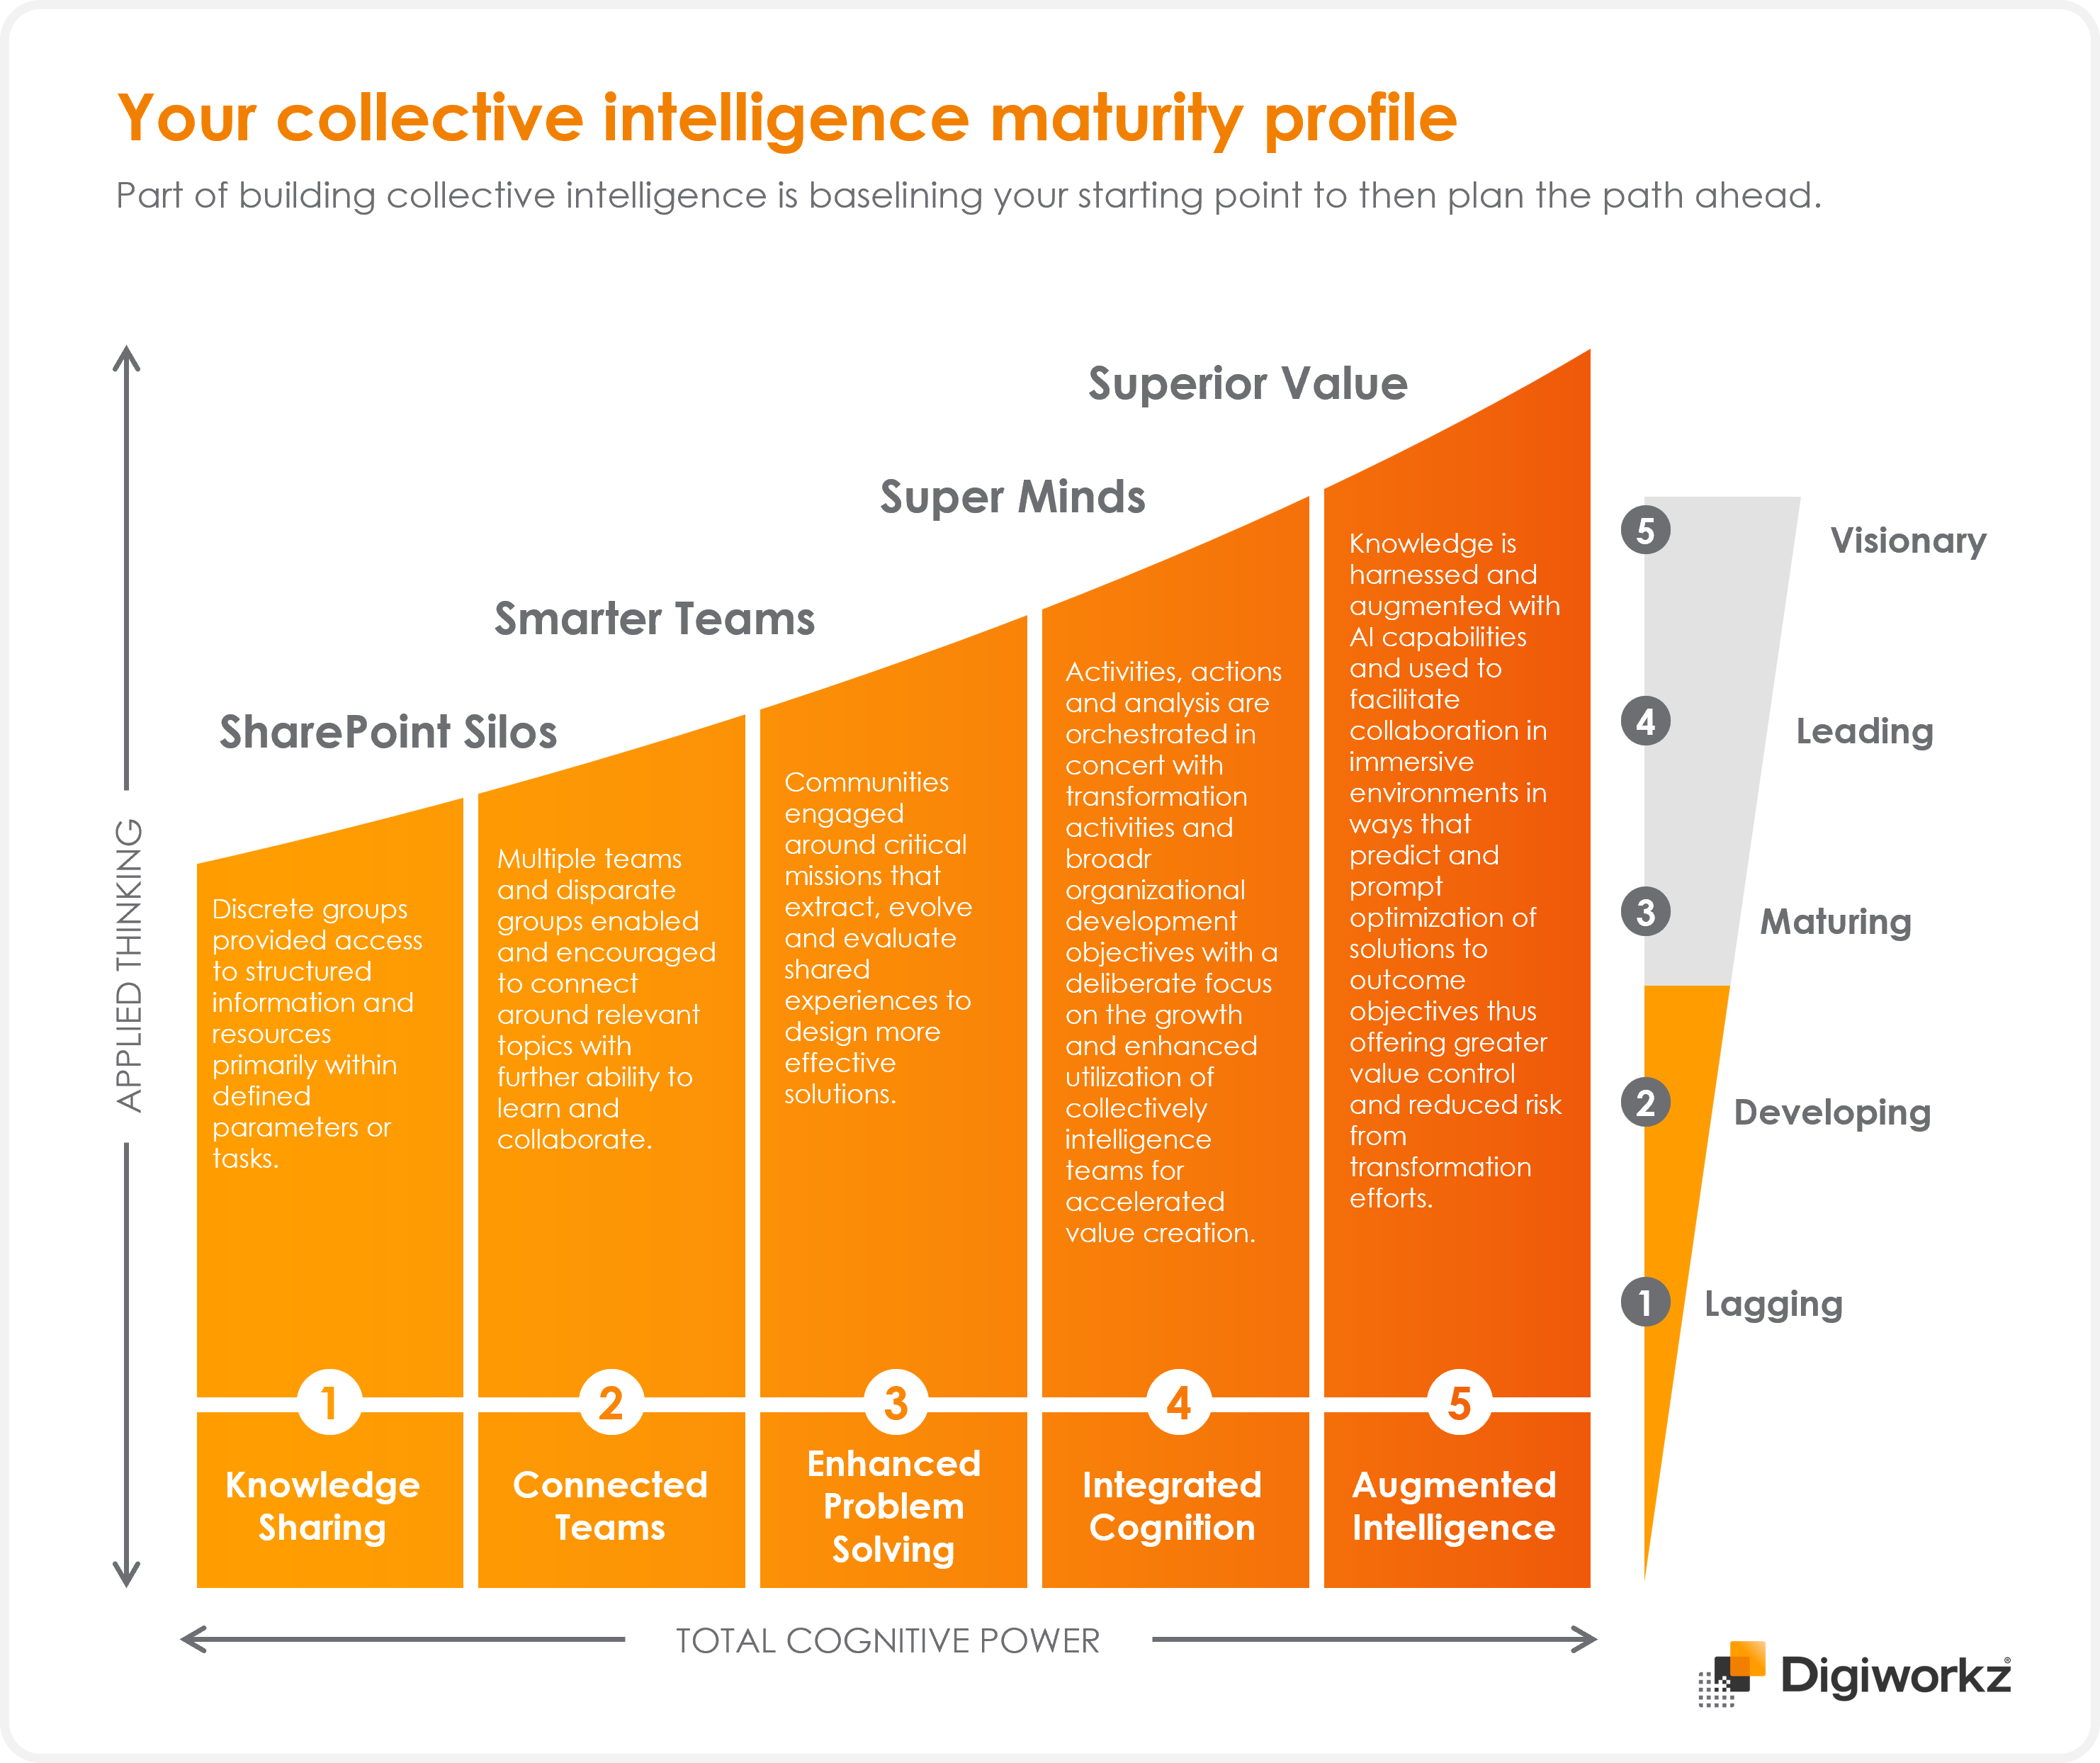 Digiworkz-business-transformation-is-collective-intelligence-anywhere-on-your-radar